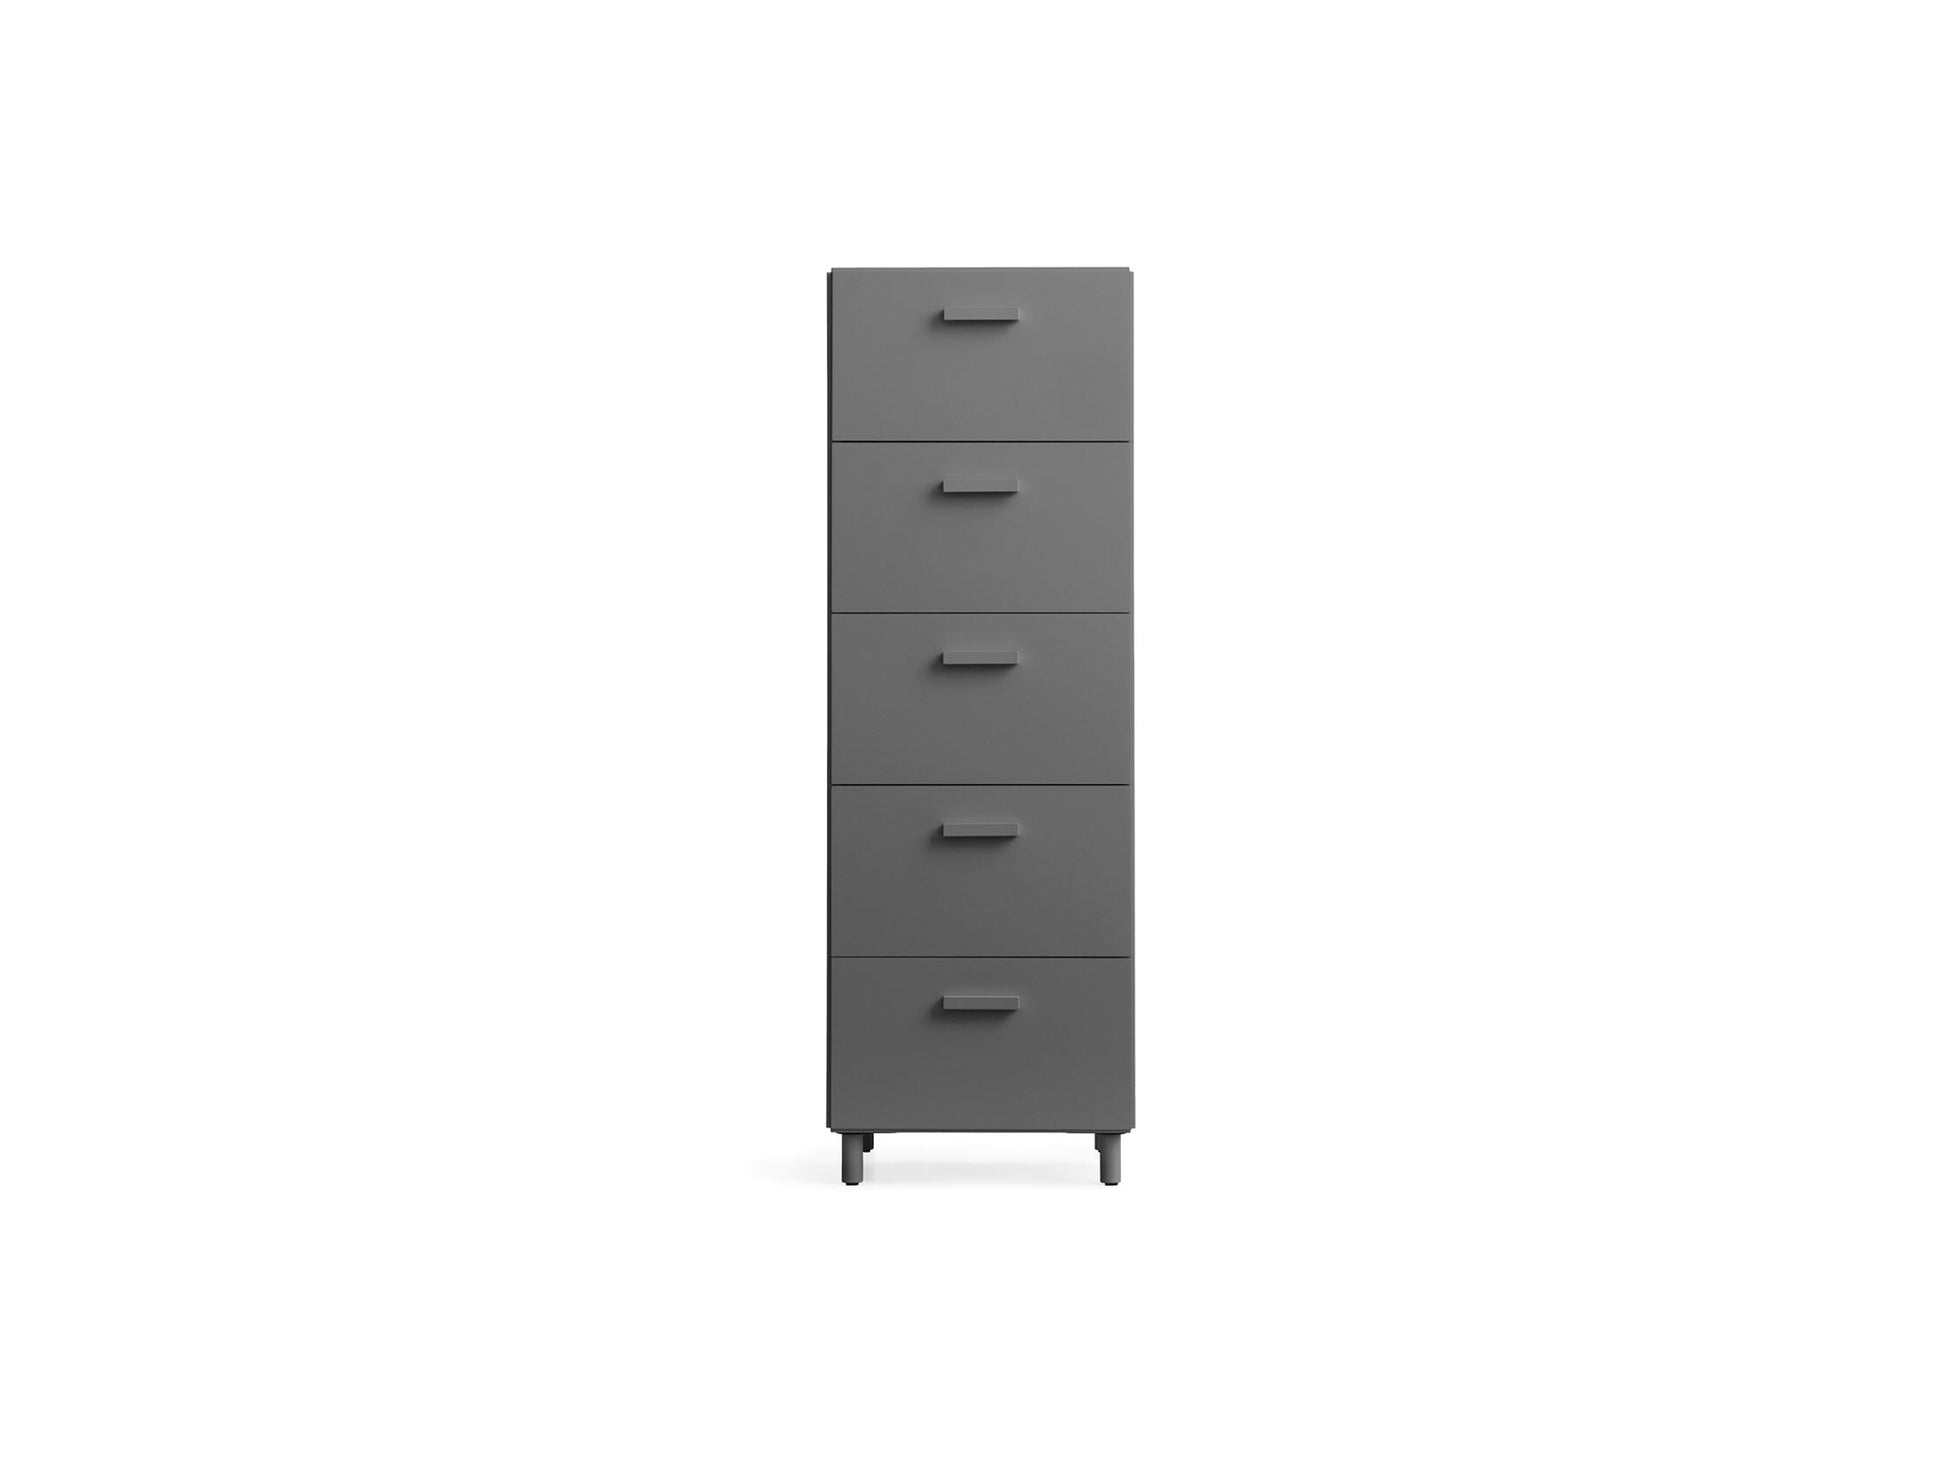 Relief Drawers with Legs - Tall by String - Grey